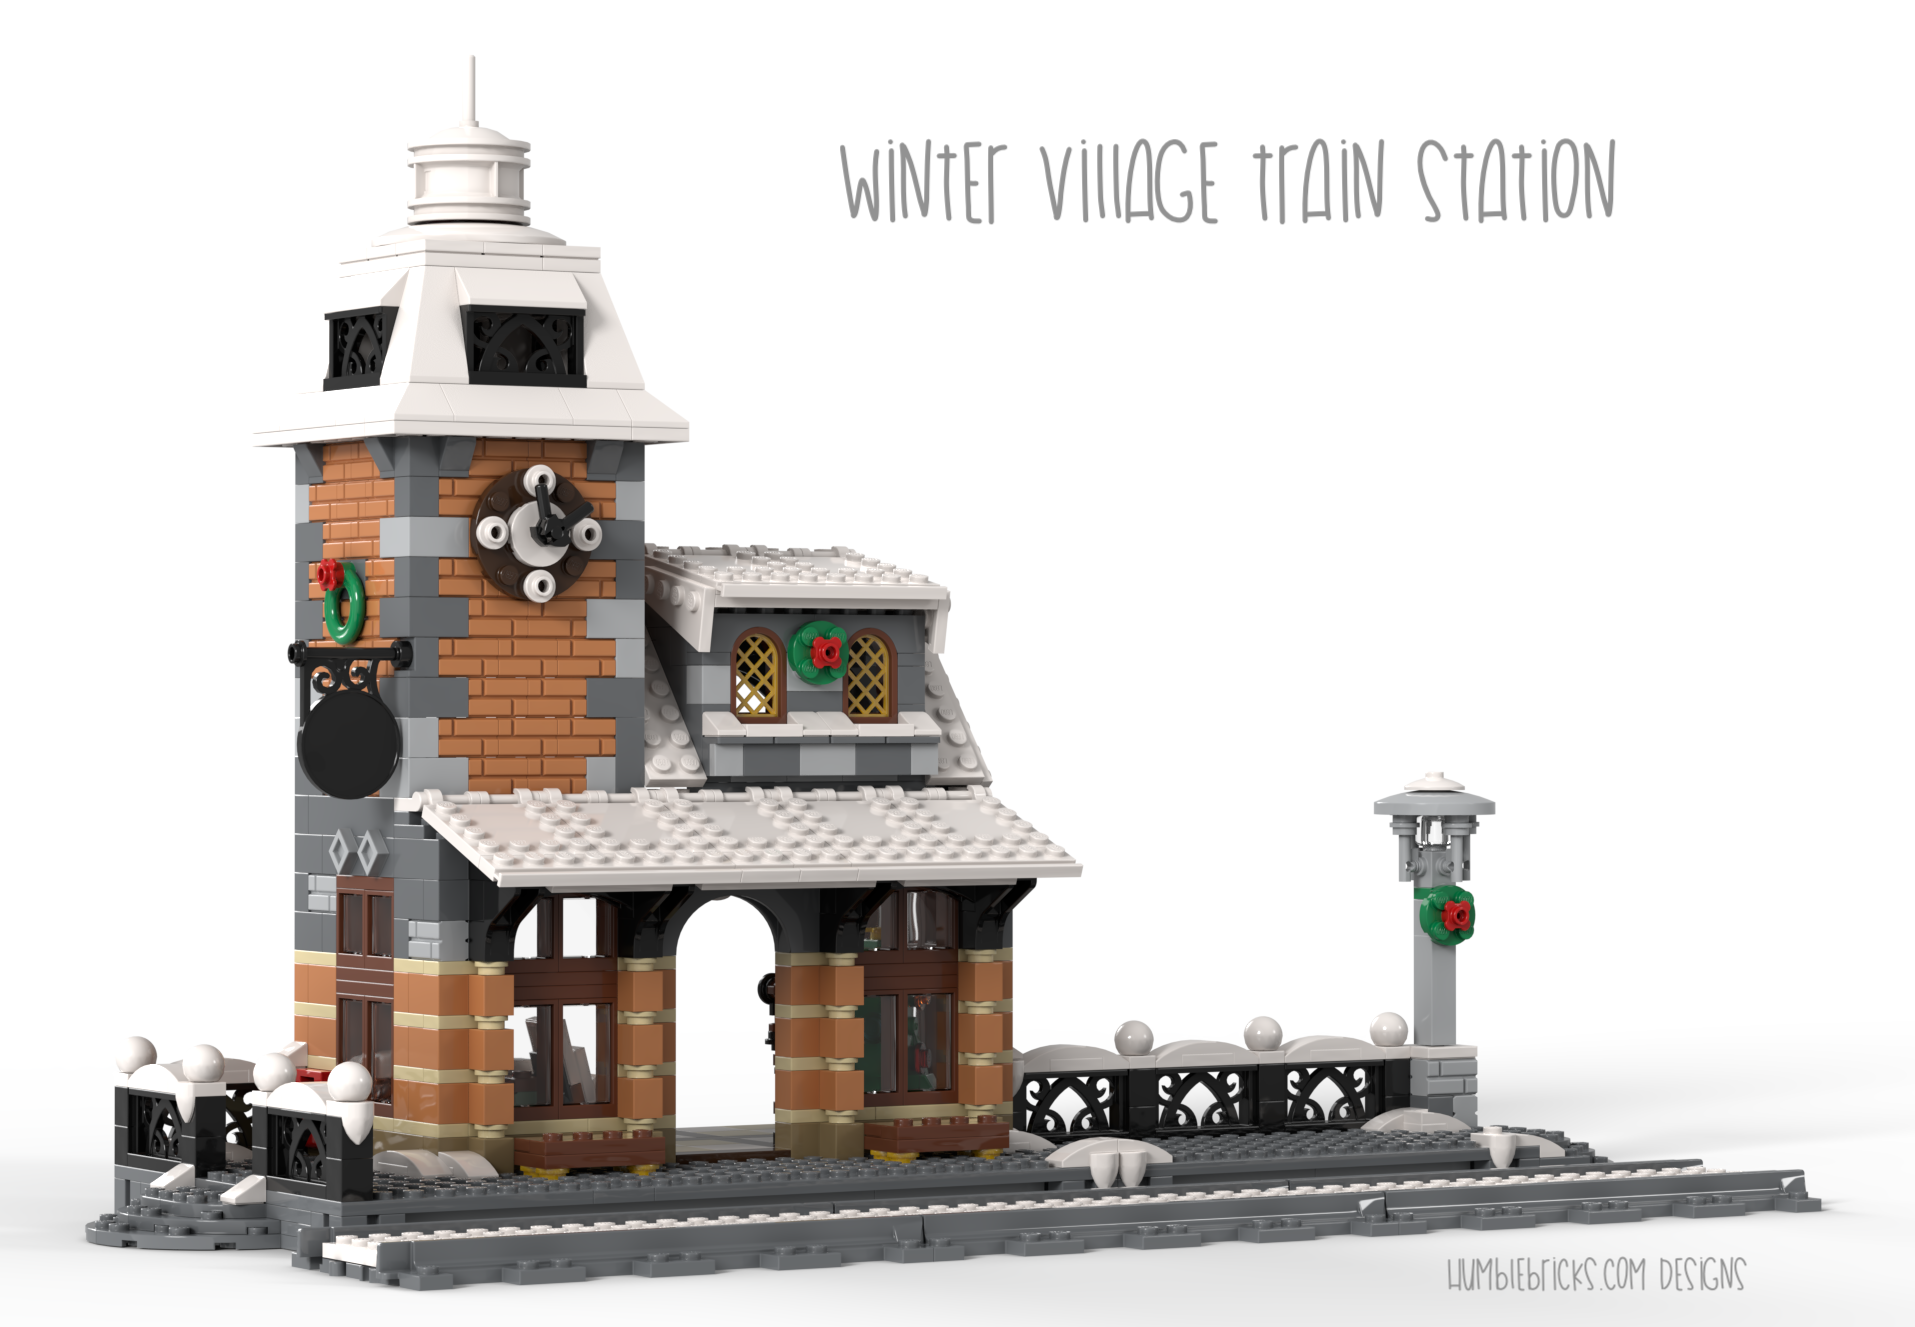 evigt Ren Arkæolog Customizing the LEGO Winter Village Holiday Main Street and Tram -  BrickNerd - All things LEGO and the LEGO fan community